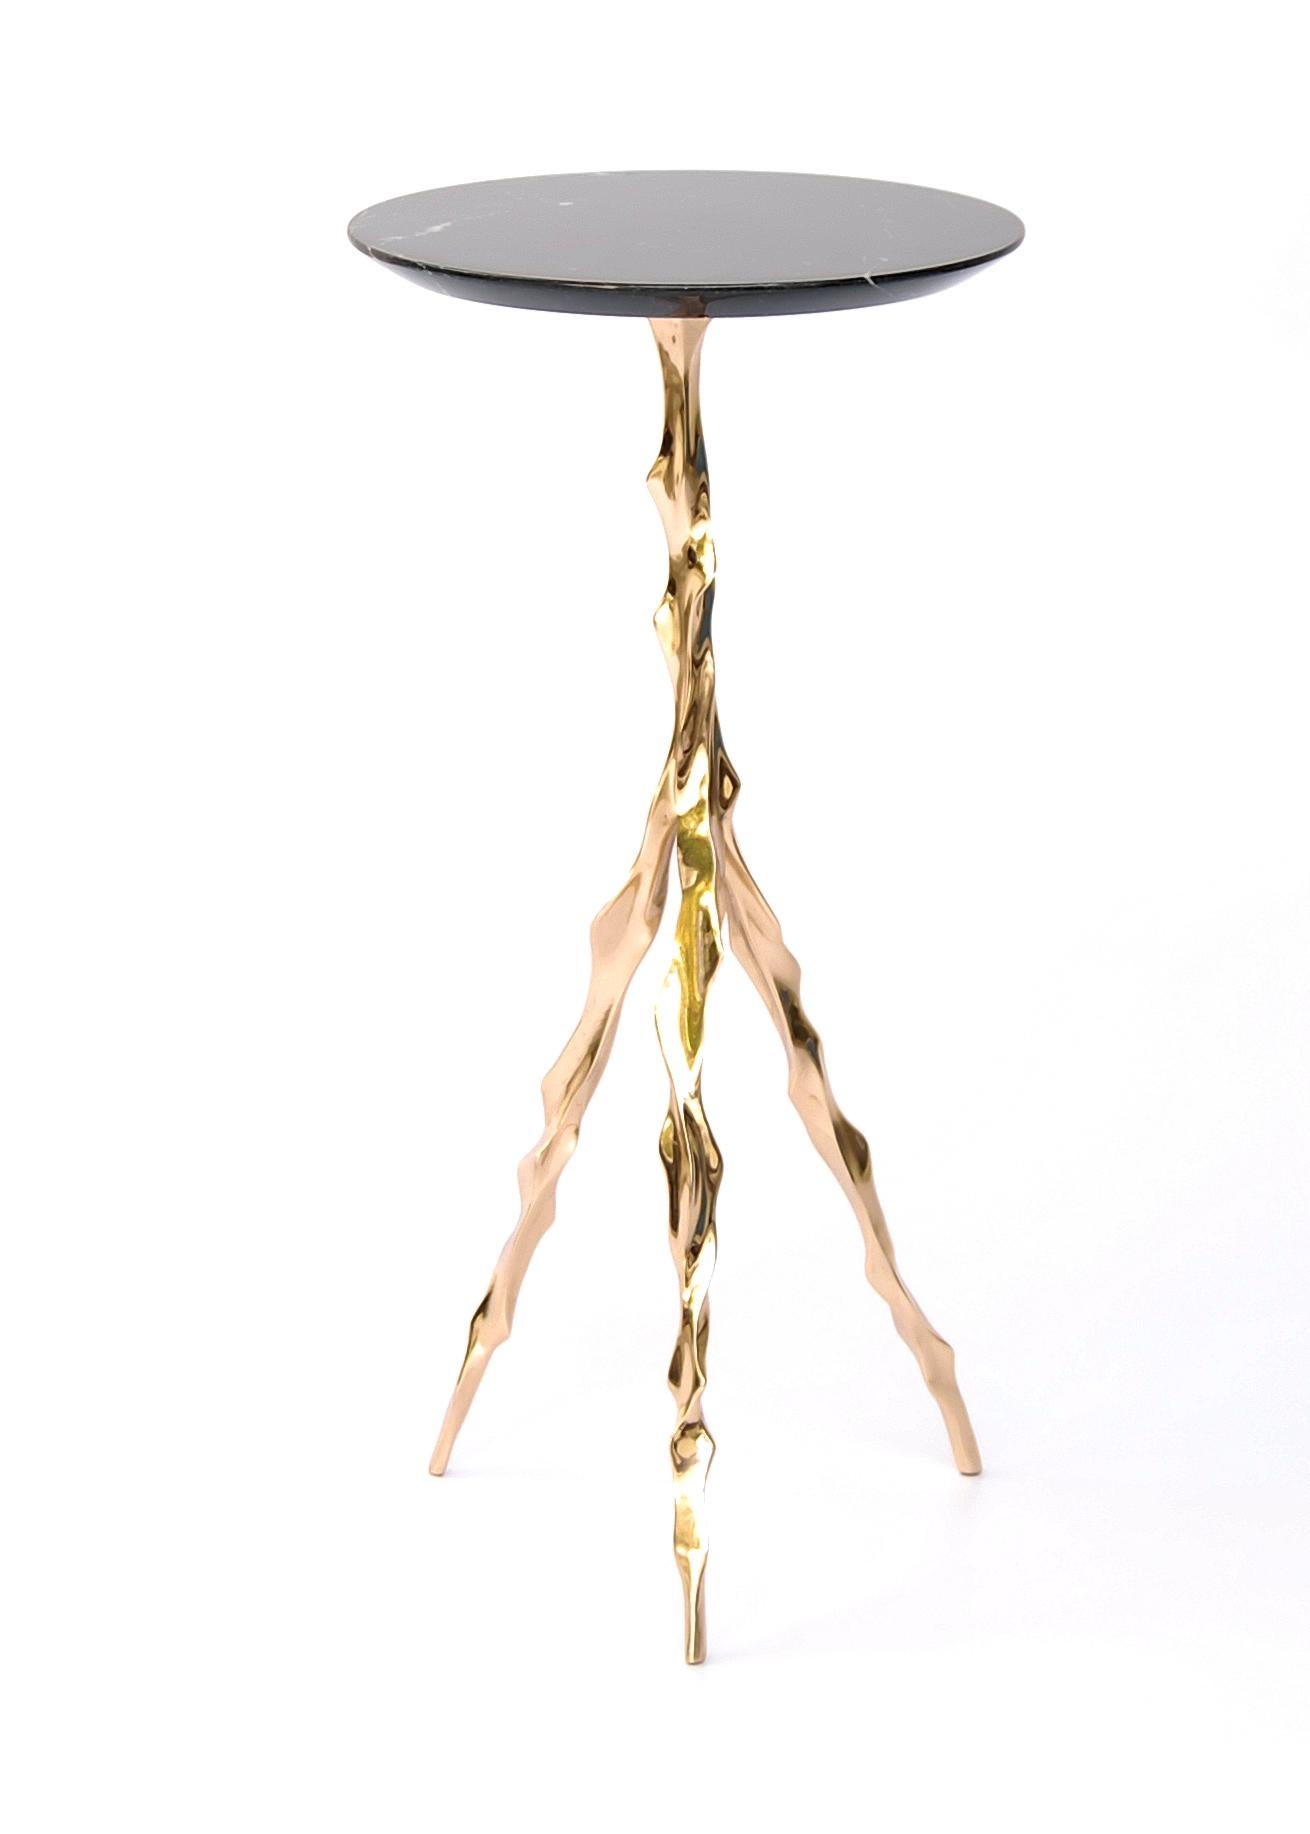 Modern Etta Drink Table with Nero Marquina Marble Top by Fakasaka Design For Sale